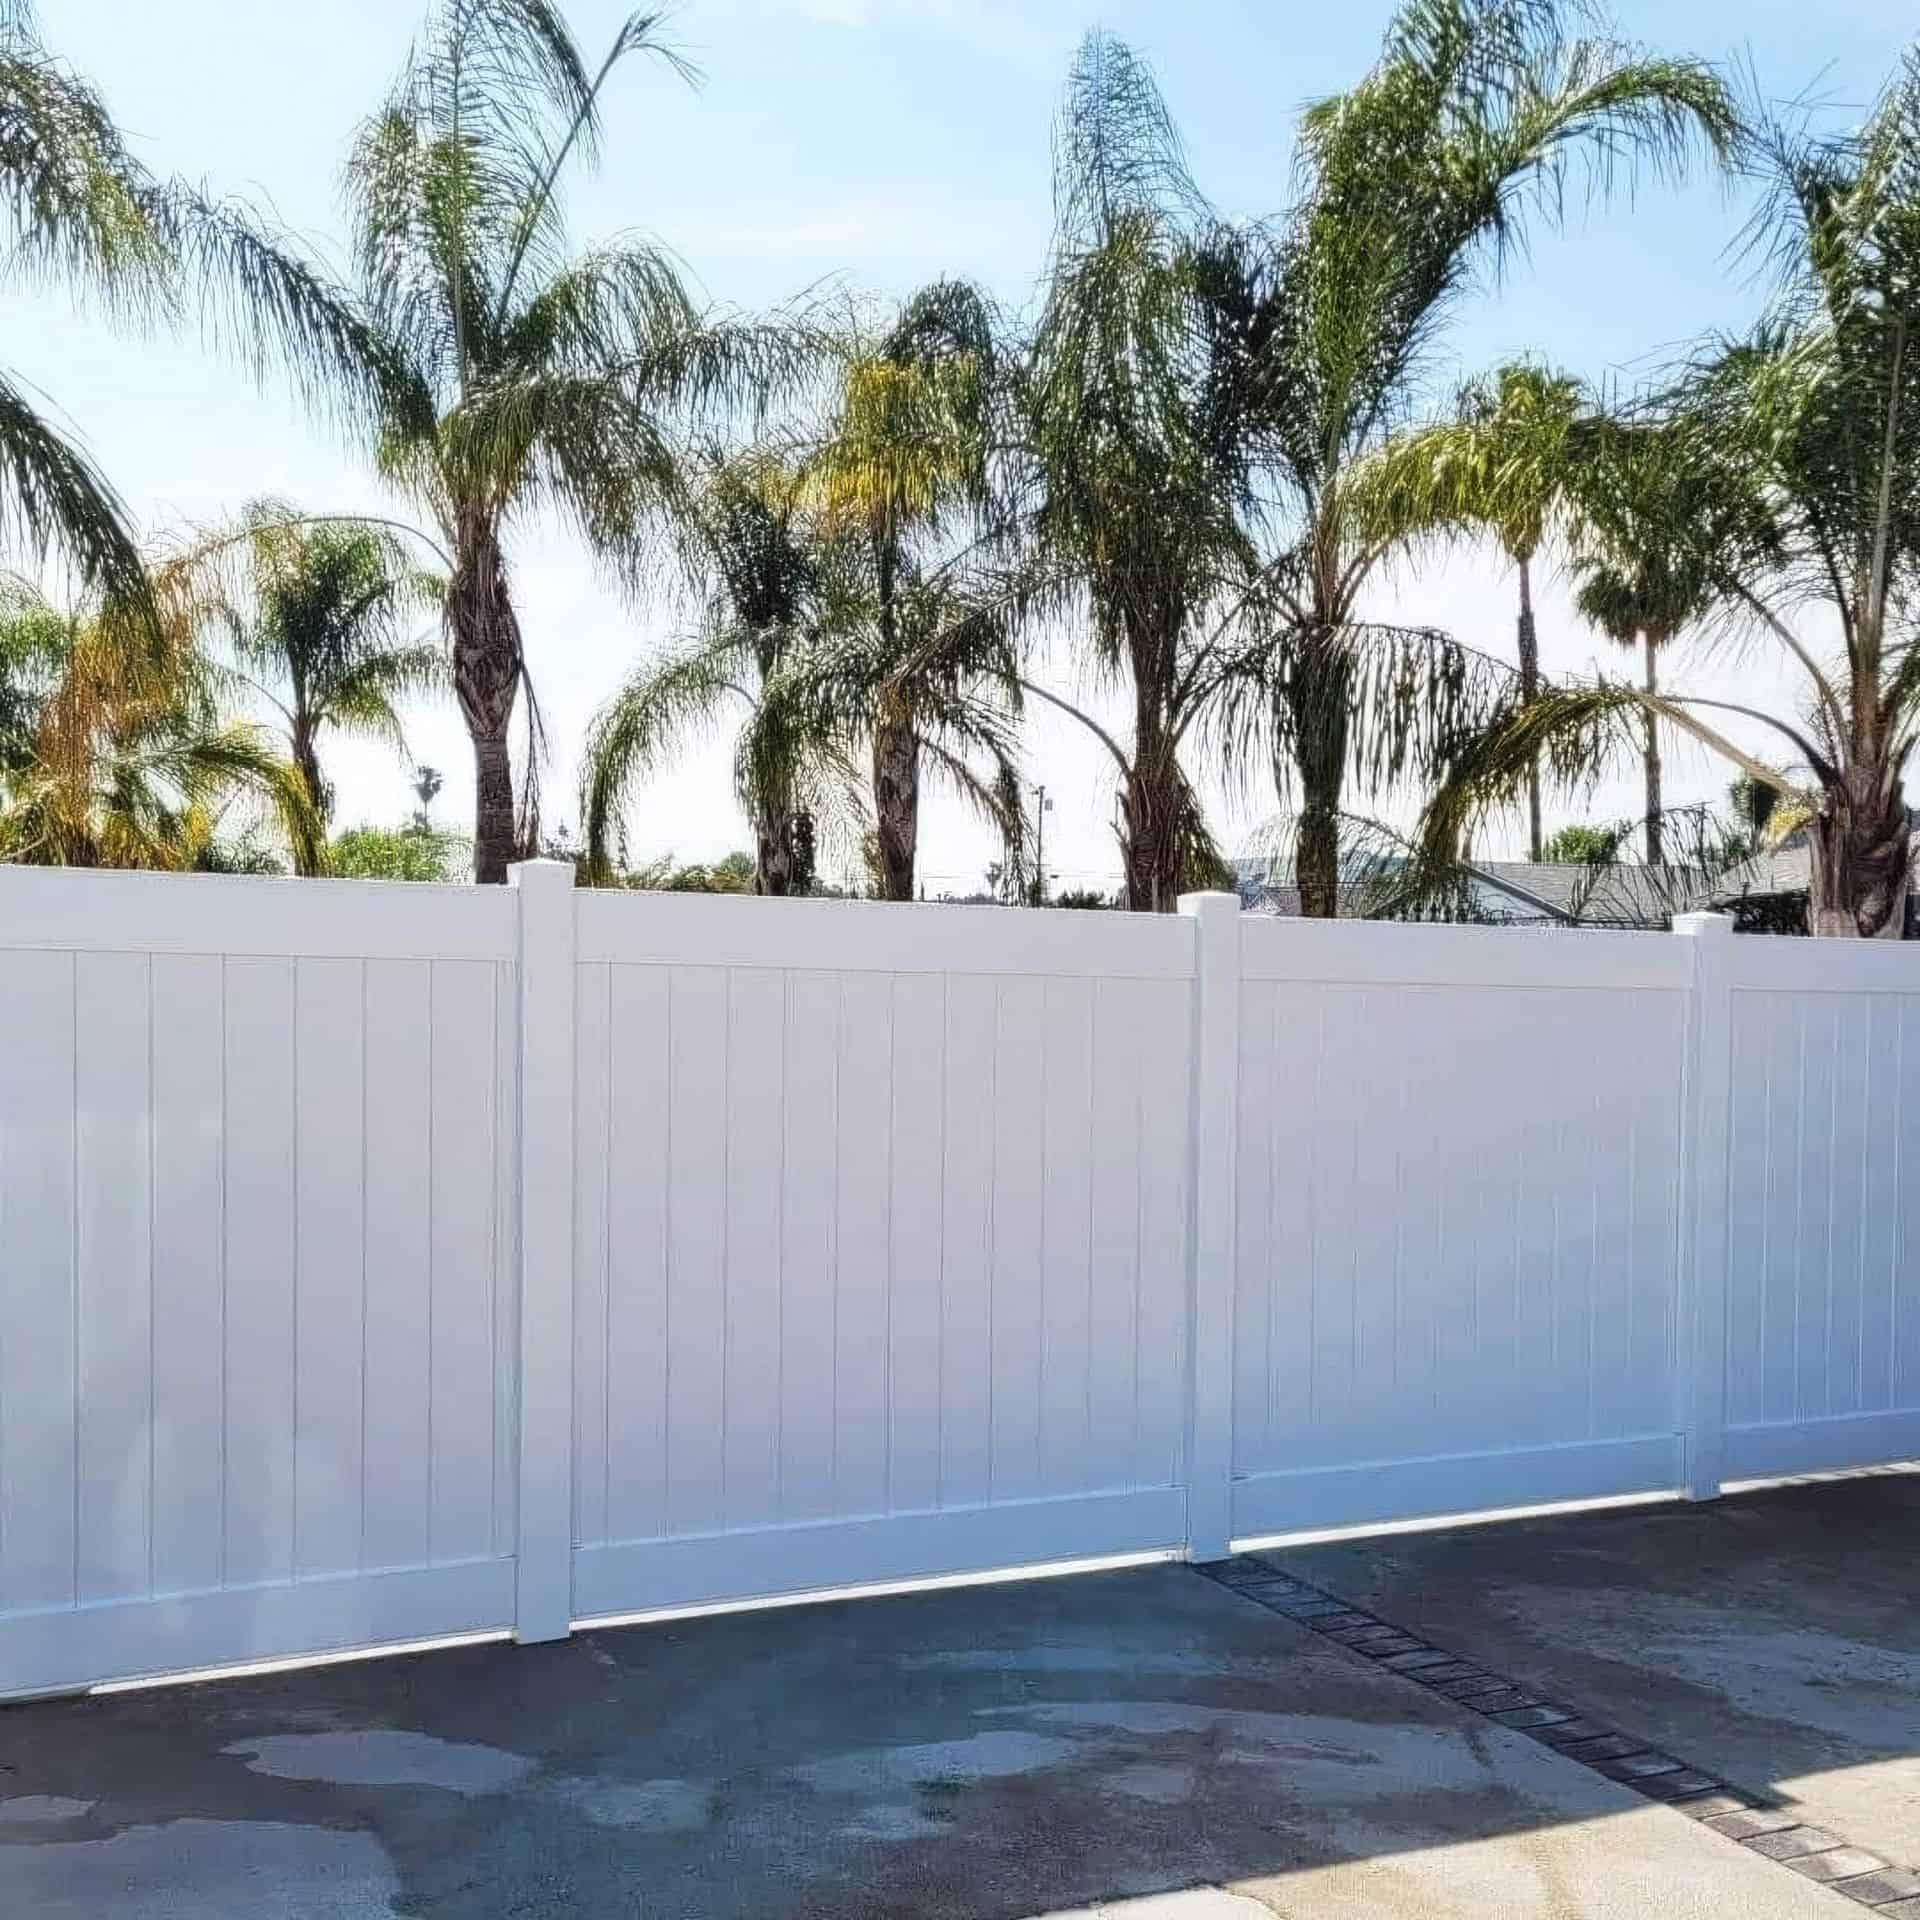 Vinyl privacy vertical fence as boundary wall for home with palm trees in the background and above concrete driveway